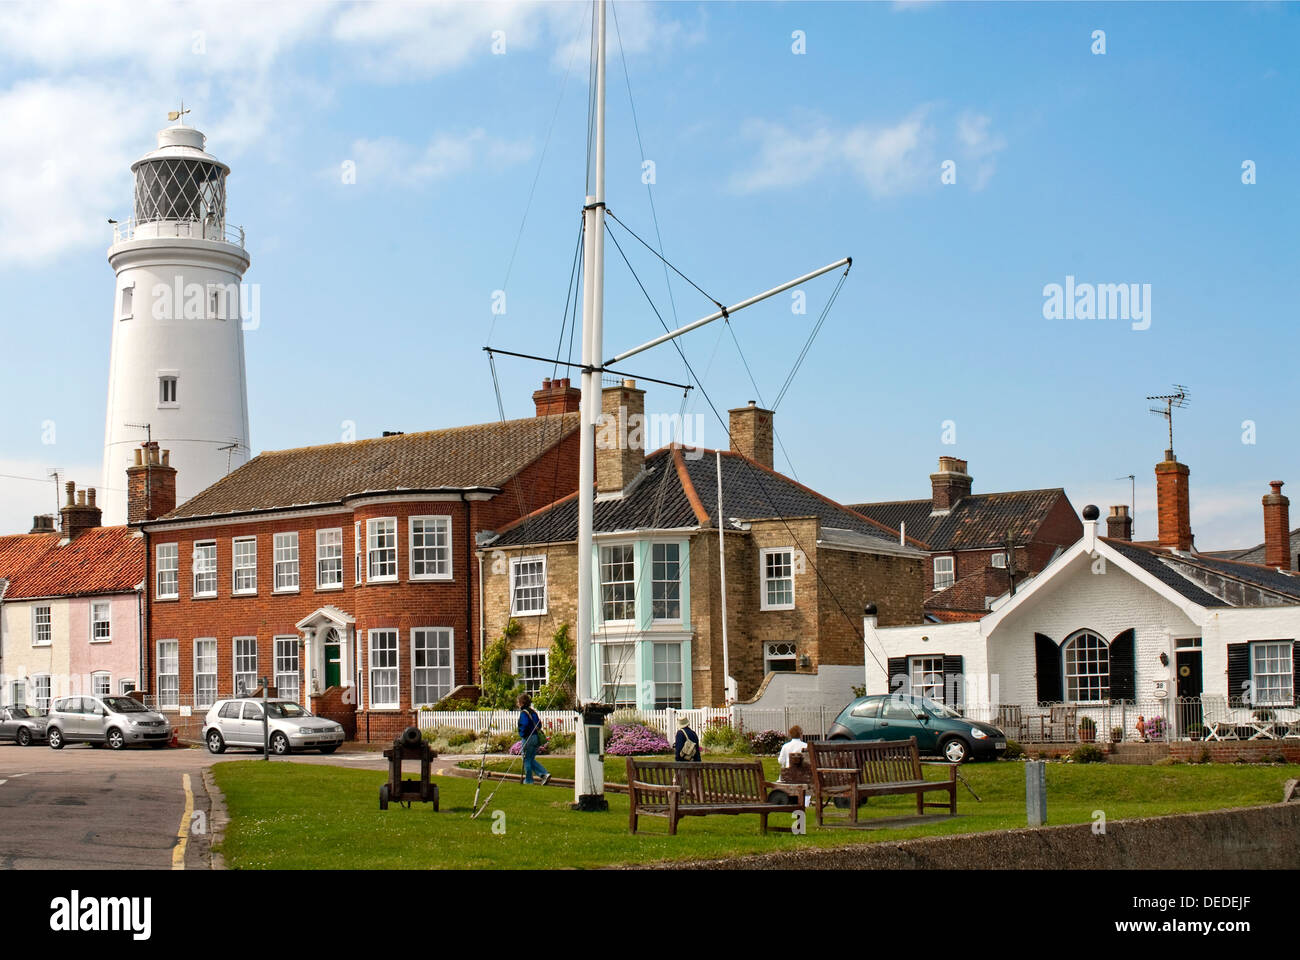 Southwold lighthouse was constructed in 1887 by Trinity House. It stands as a landmark in the centre of the town. Stock Photo